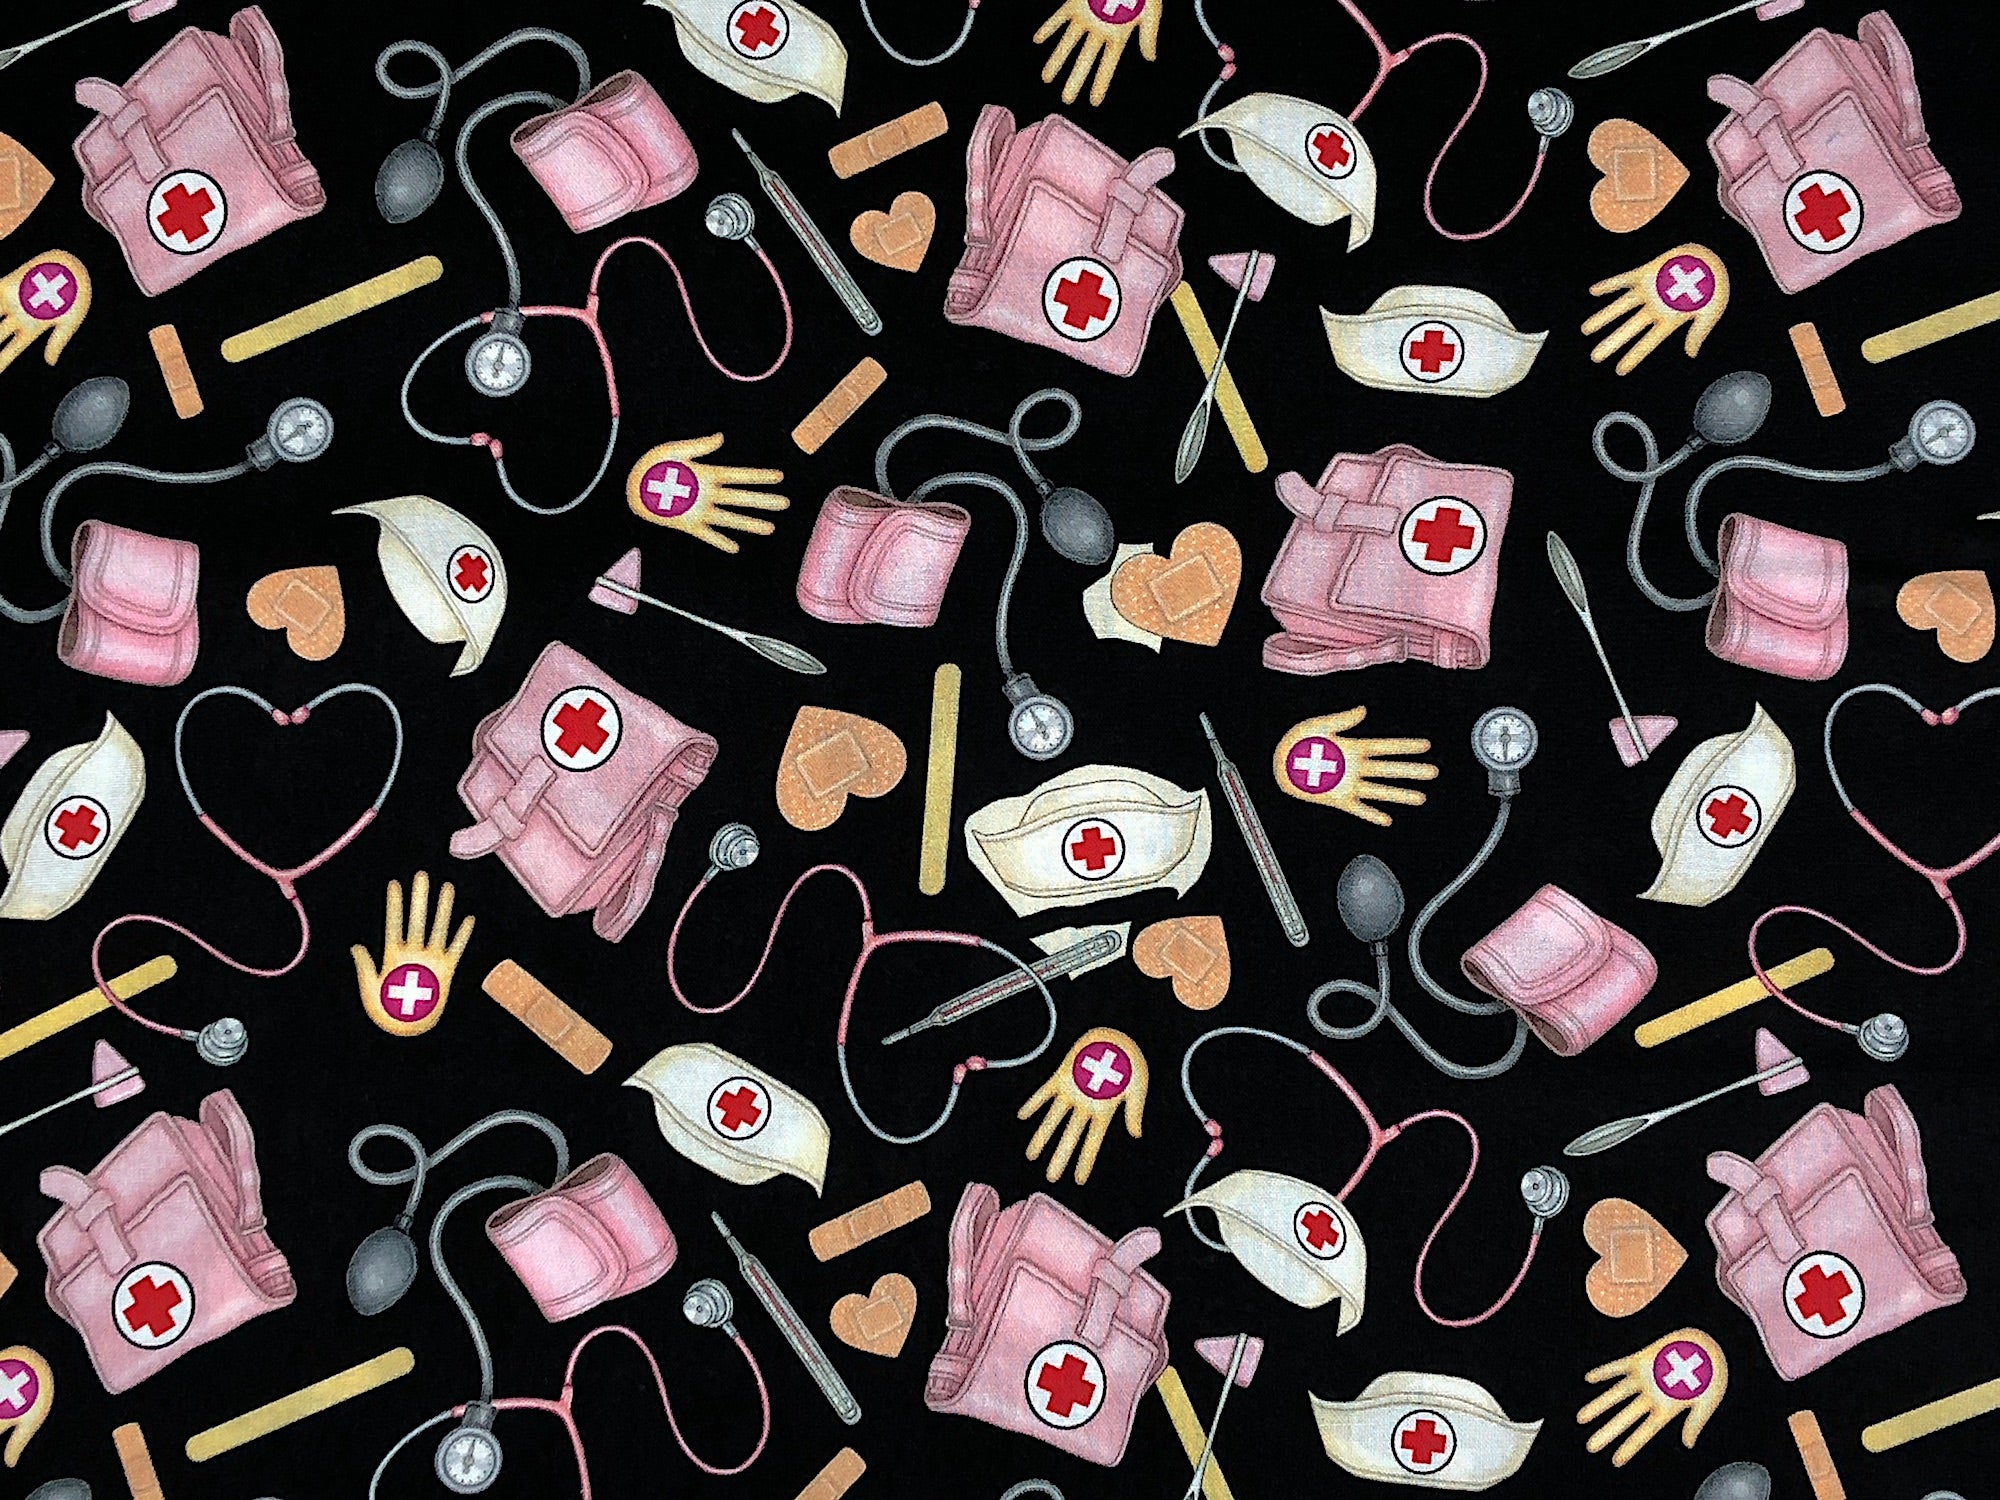 Black cotton fabric covered with nurse hats, bags, stethoscopes and more.